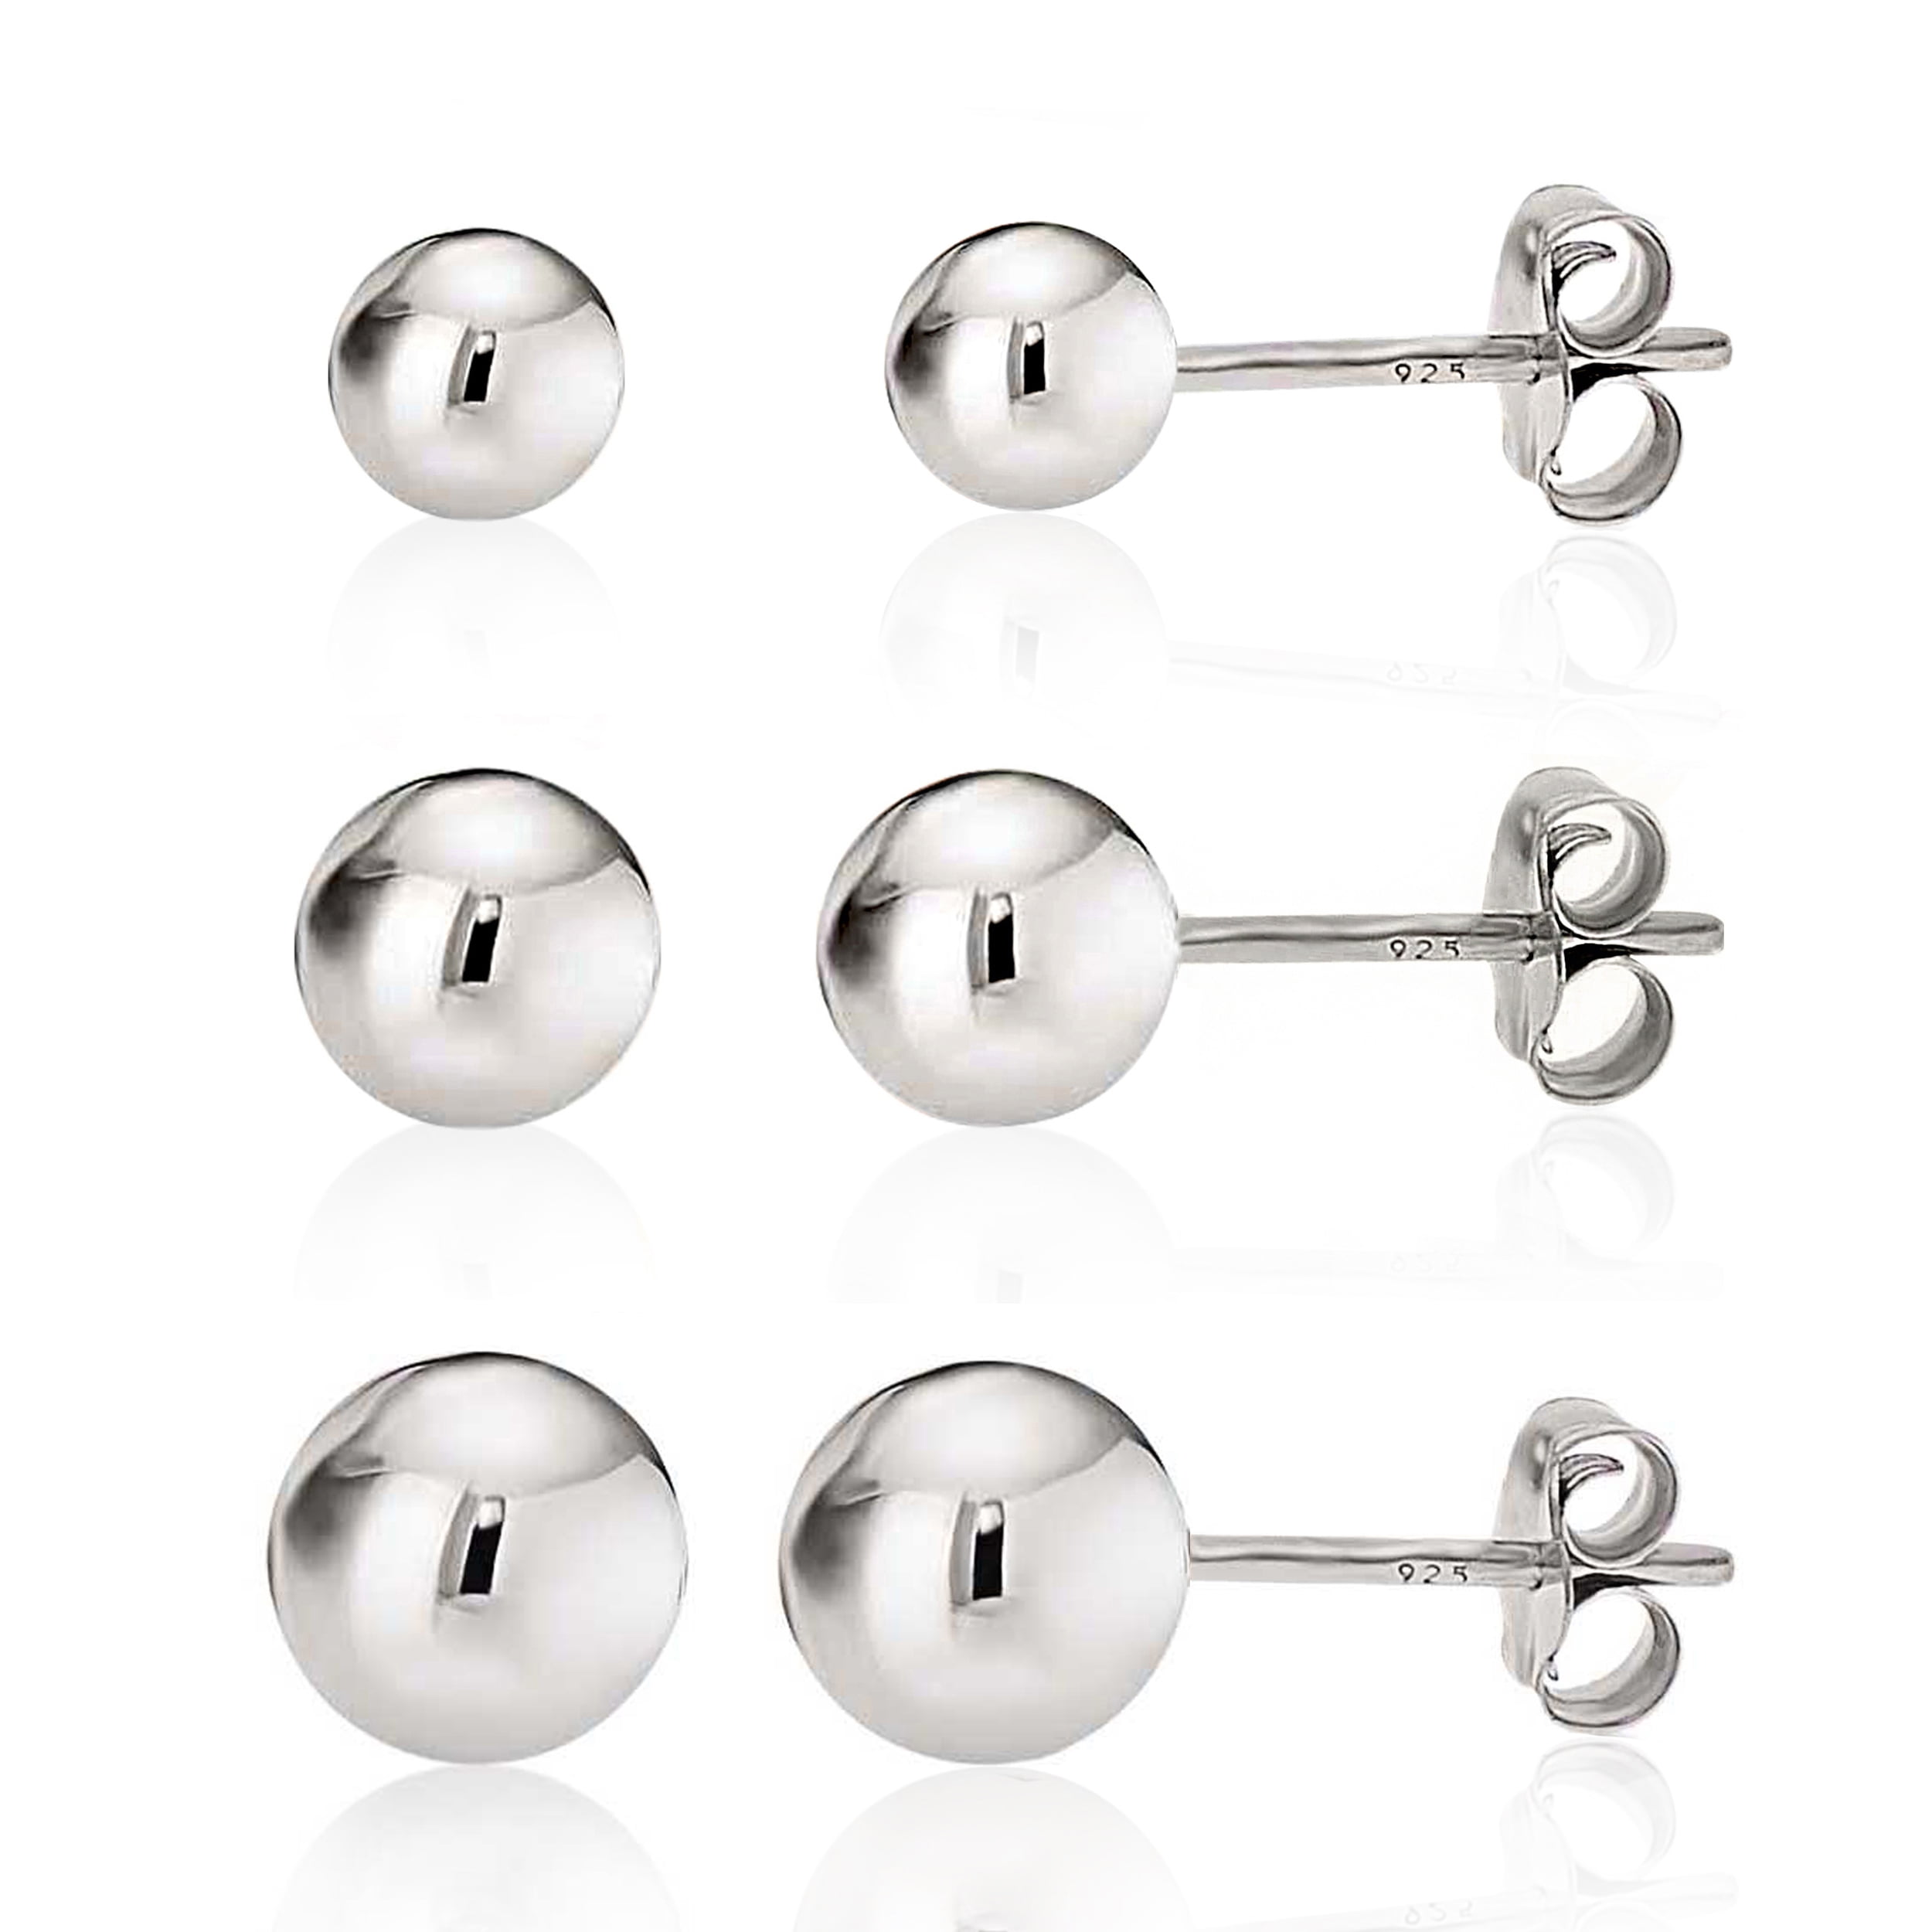 Handmade 925 Sterling Silver 6 mm Polished Round Ball Stud Earrings 